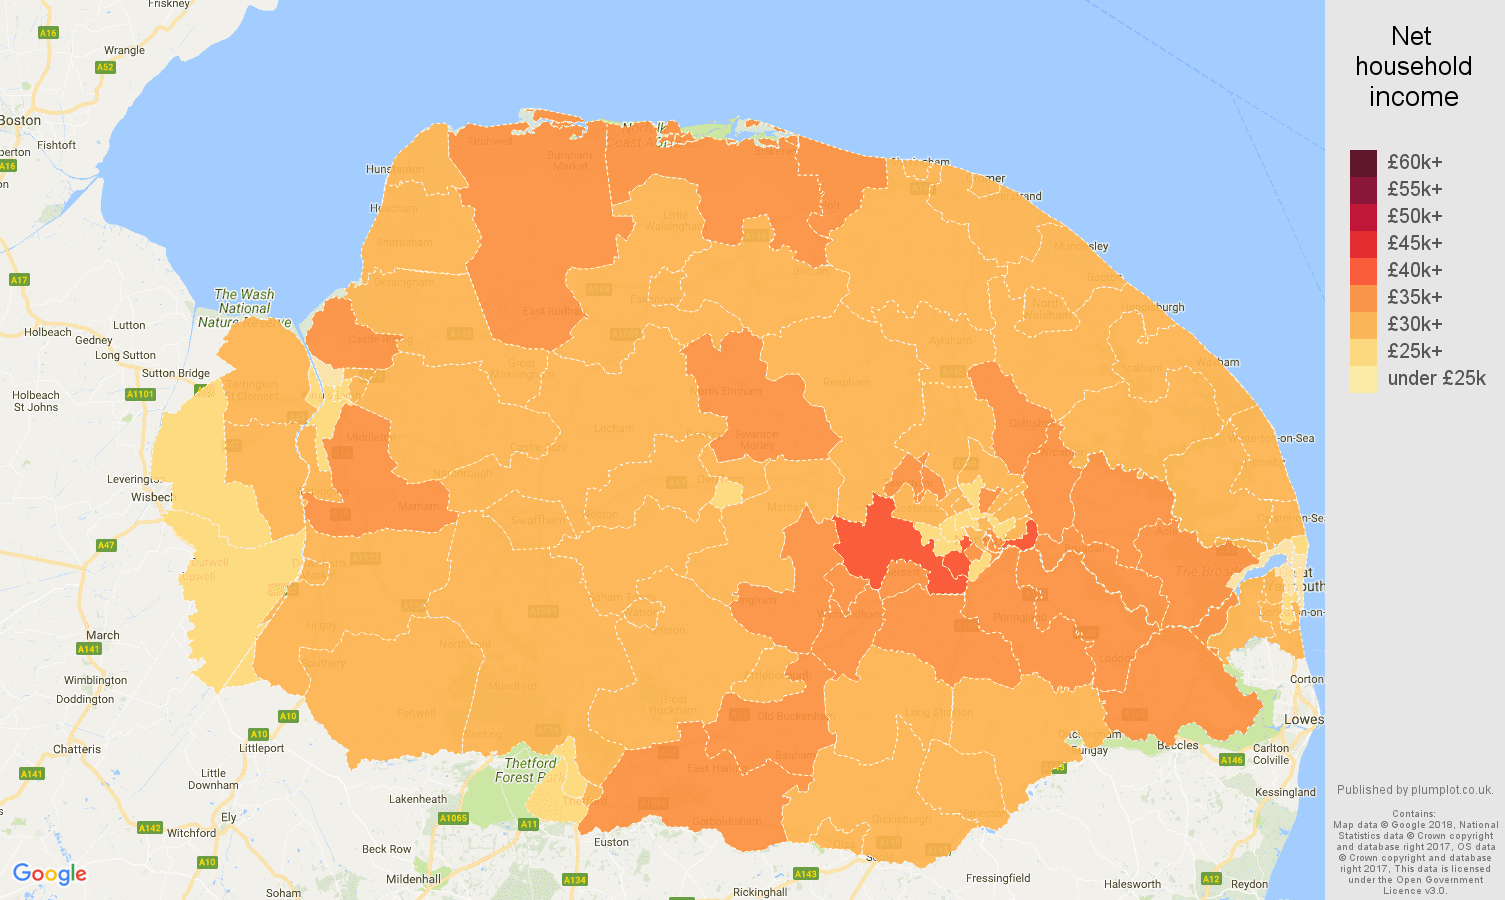 Norfolk net household income map